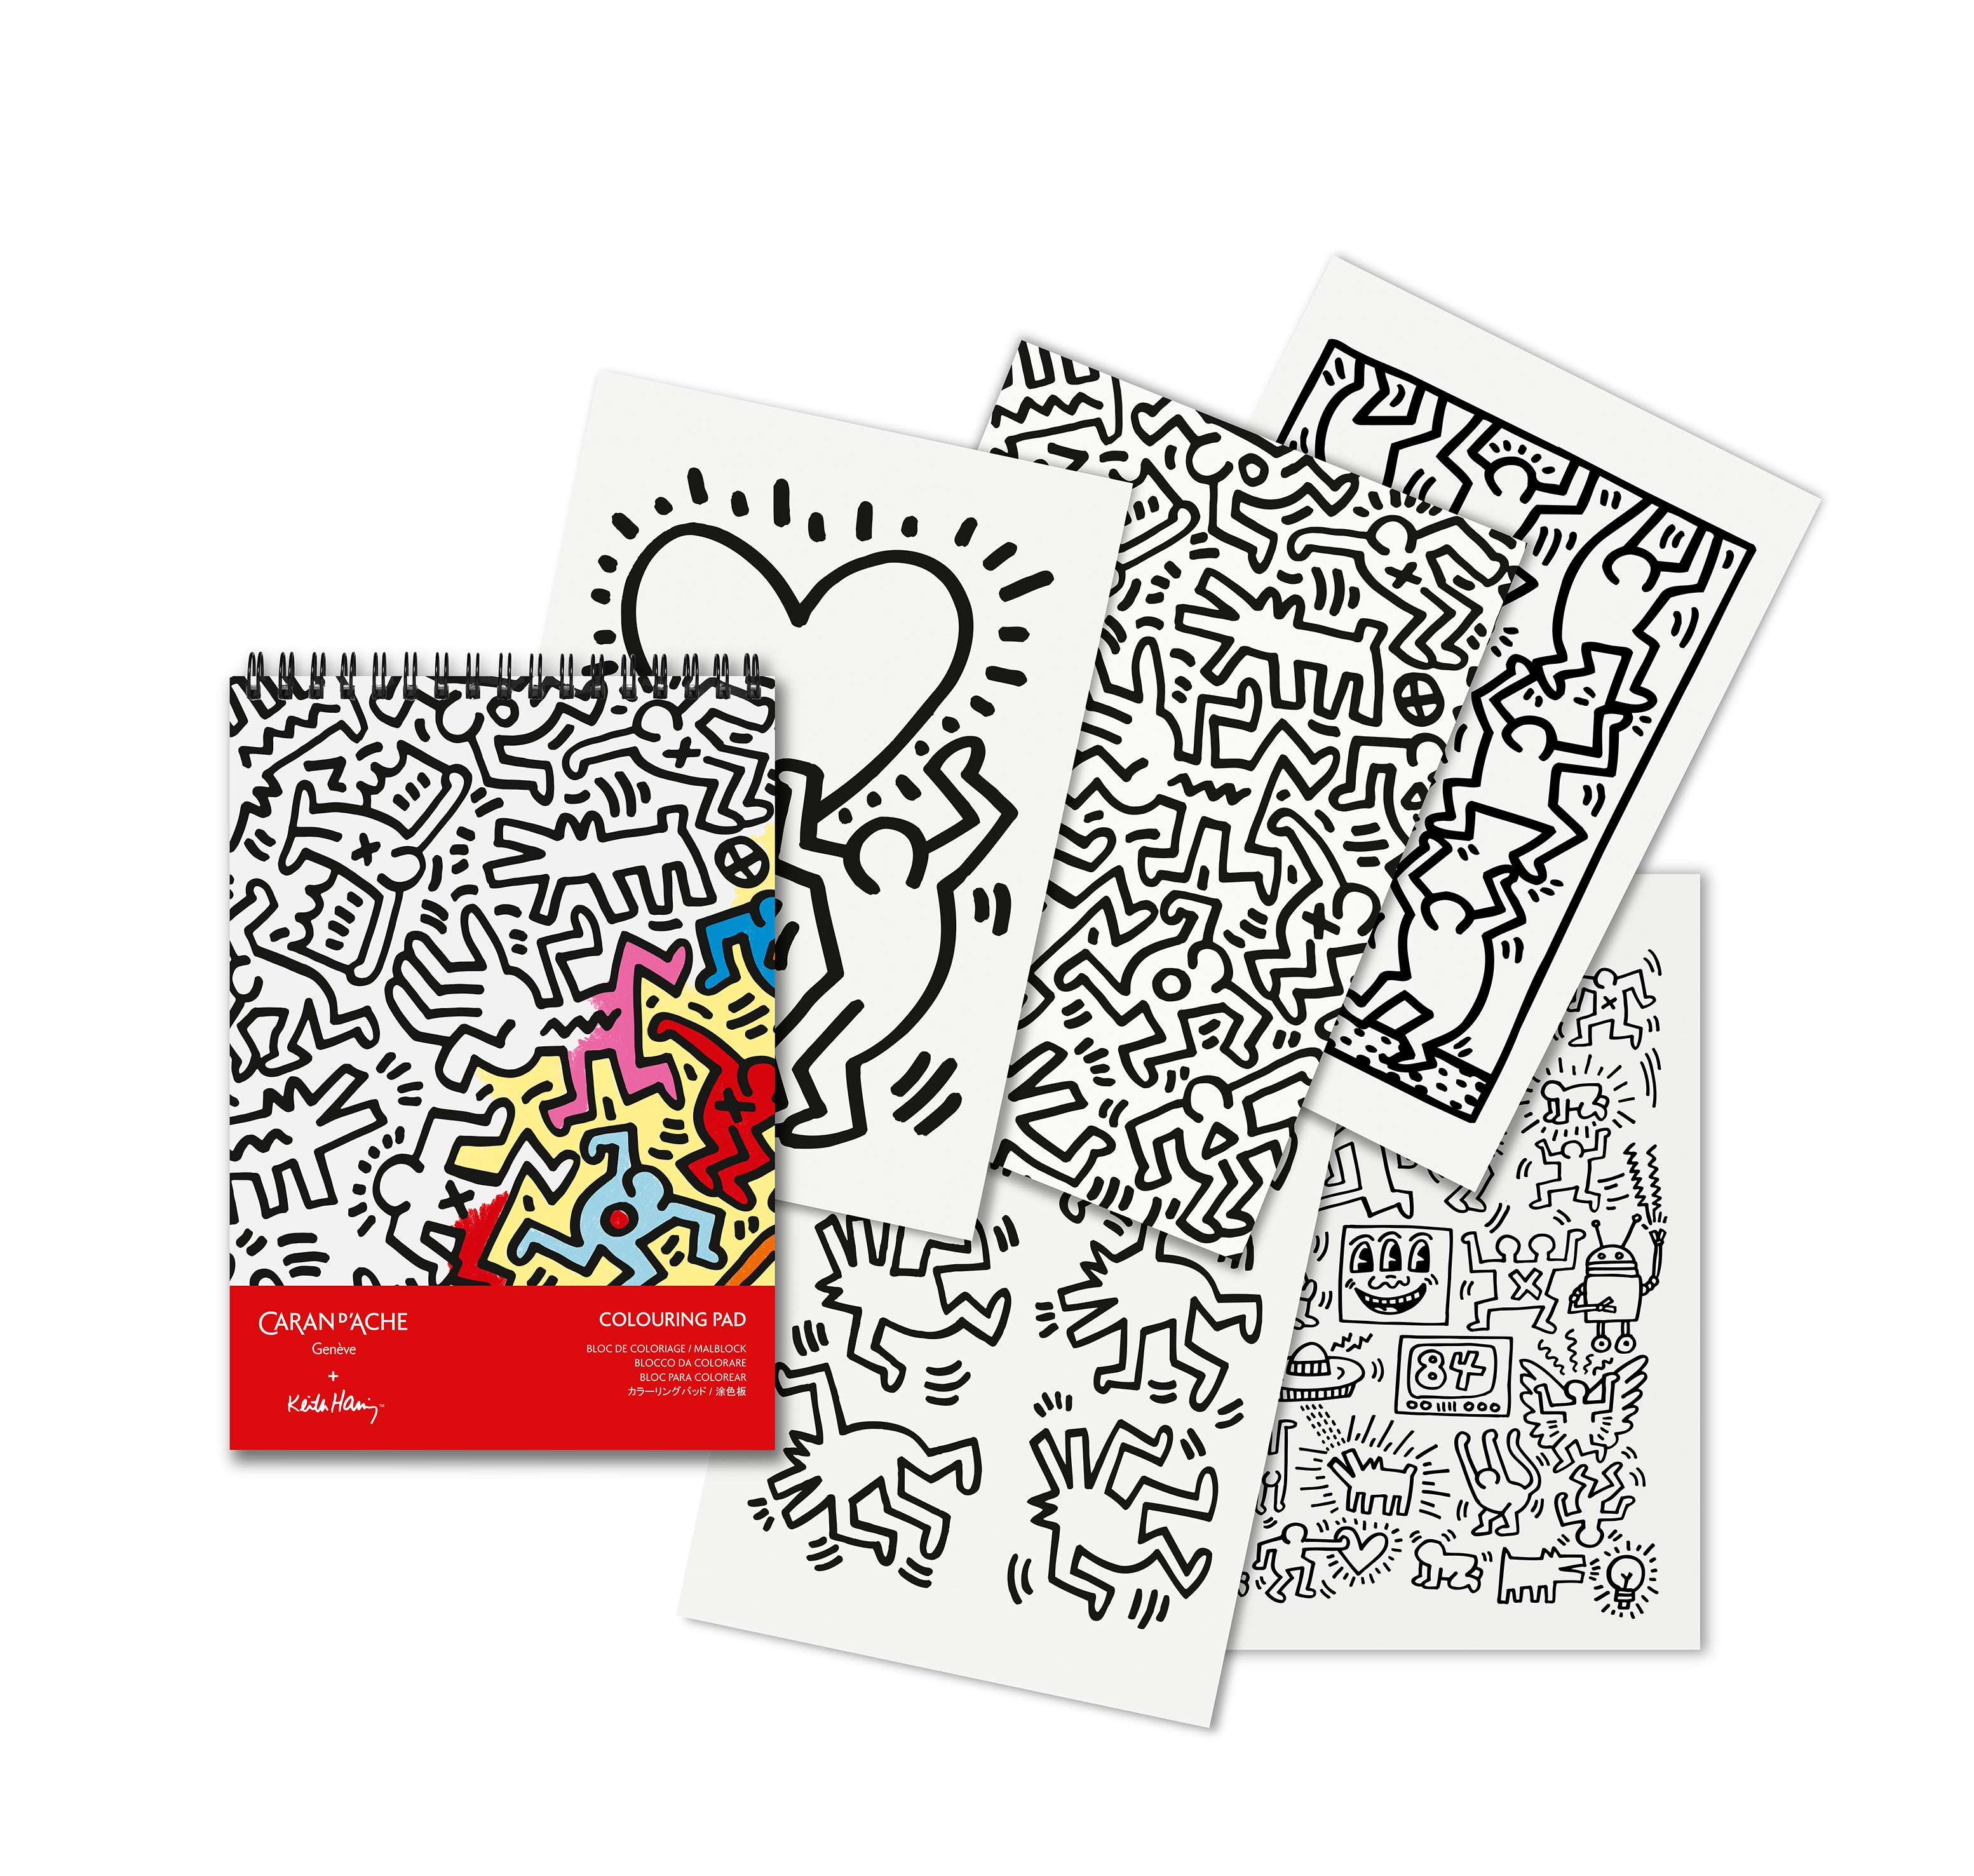 Keith haring specil edition colouring pad 